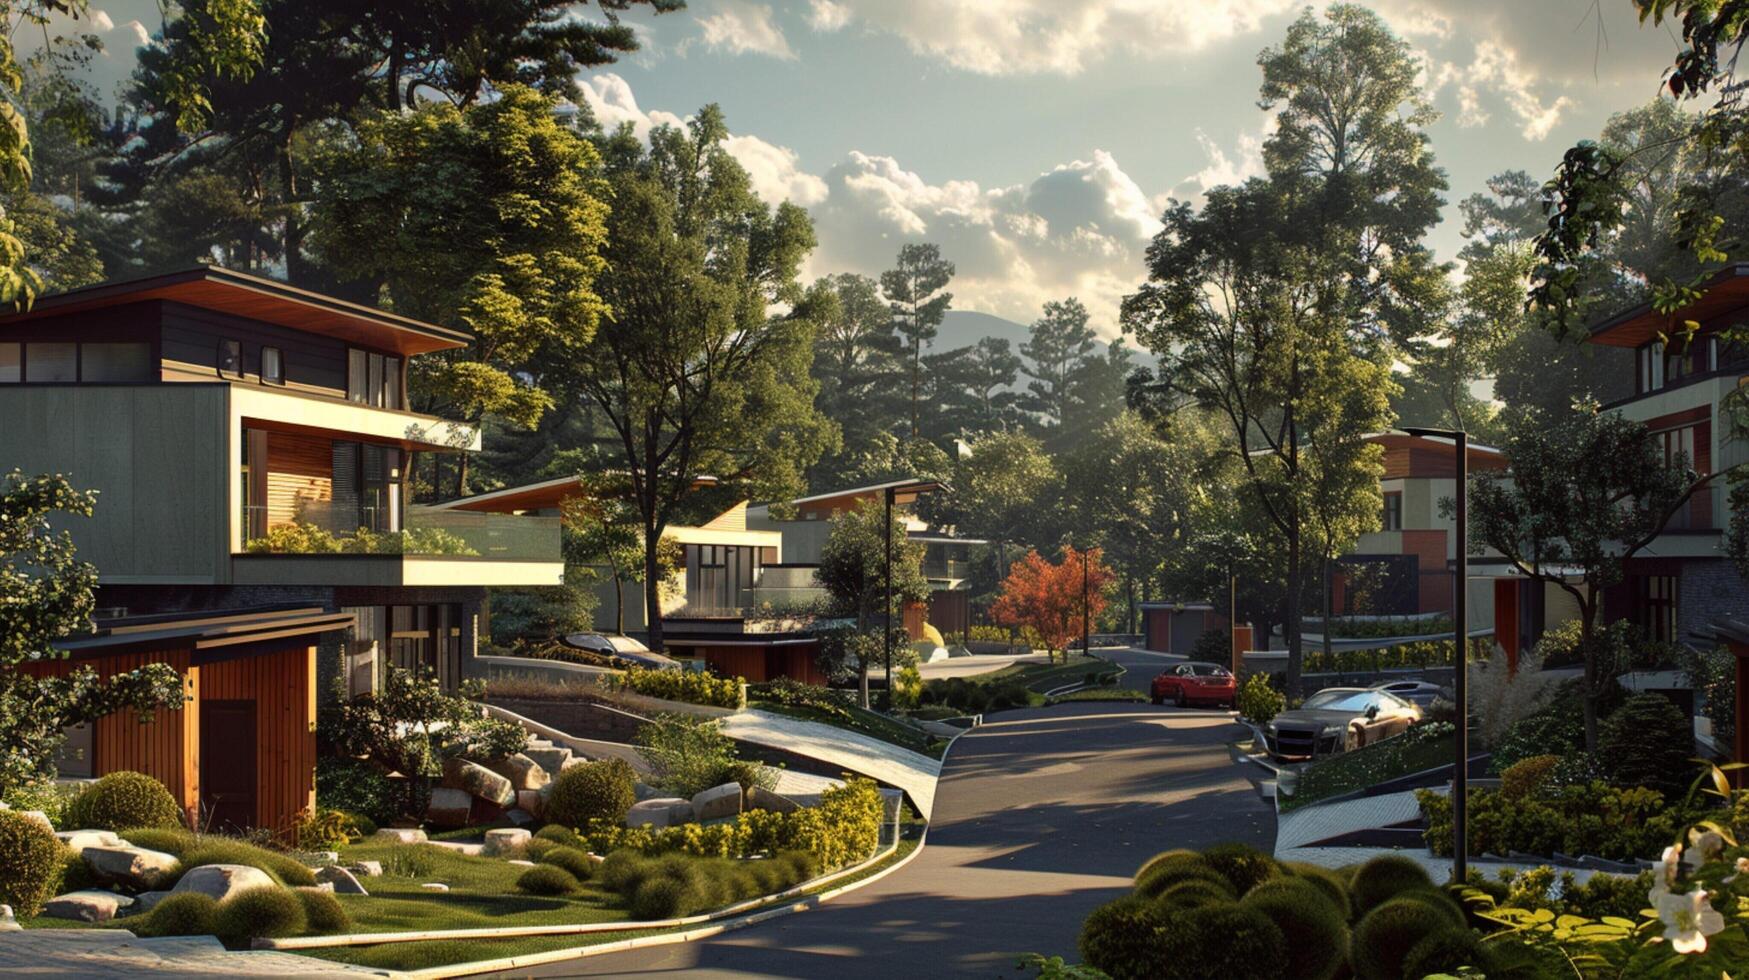 architecture and nature meet in this modern suburban photo